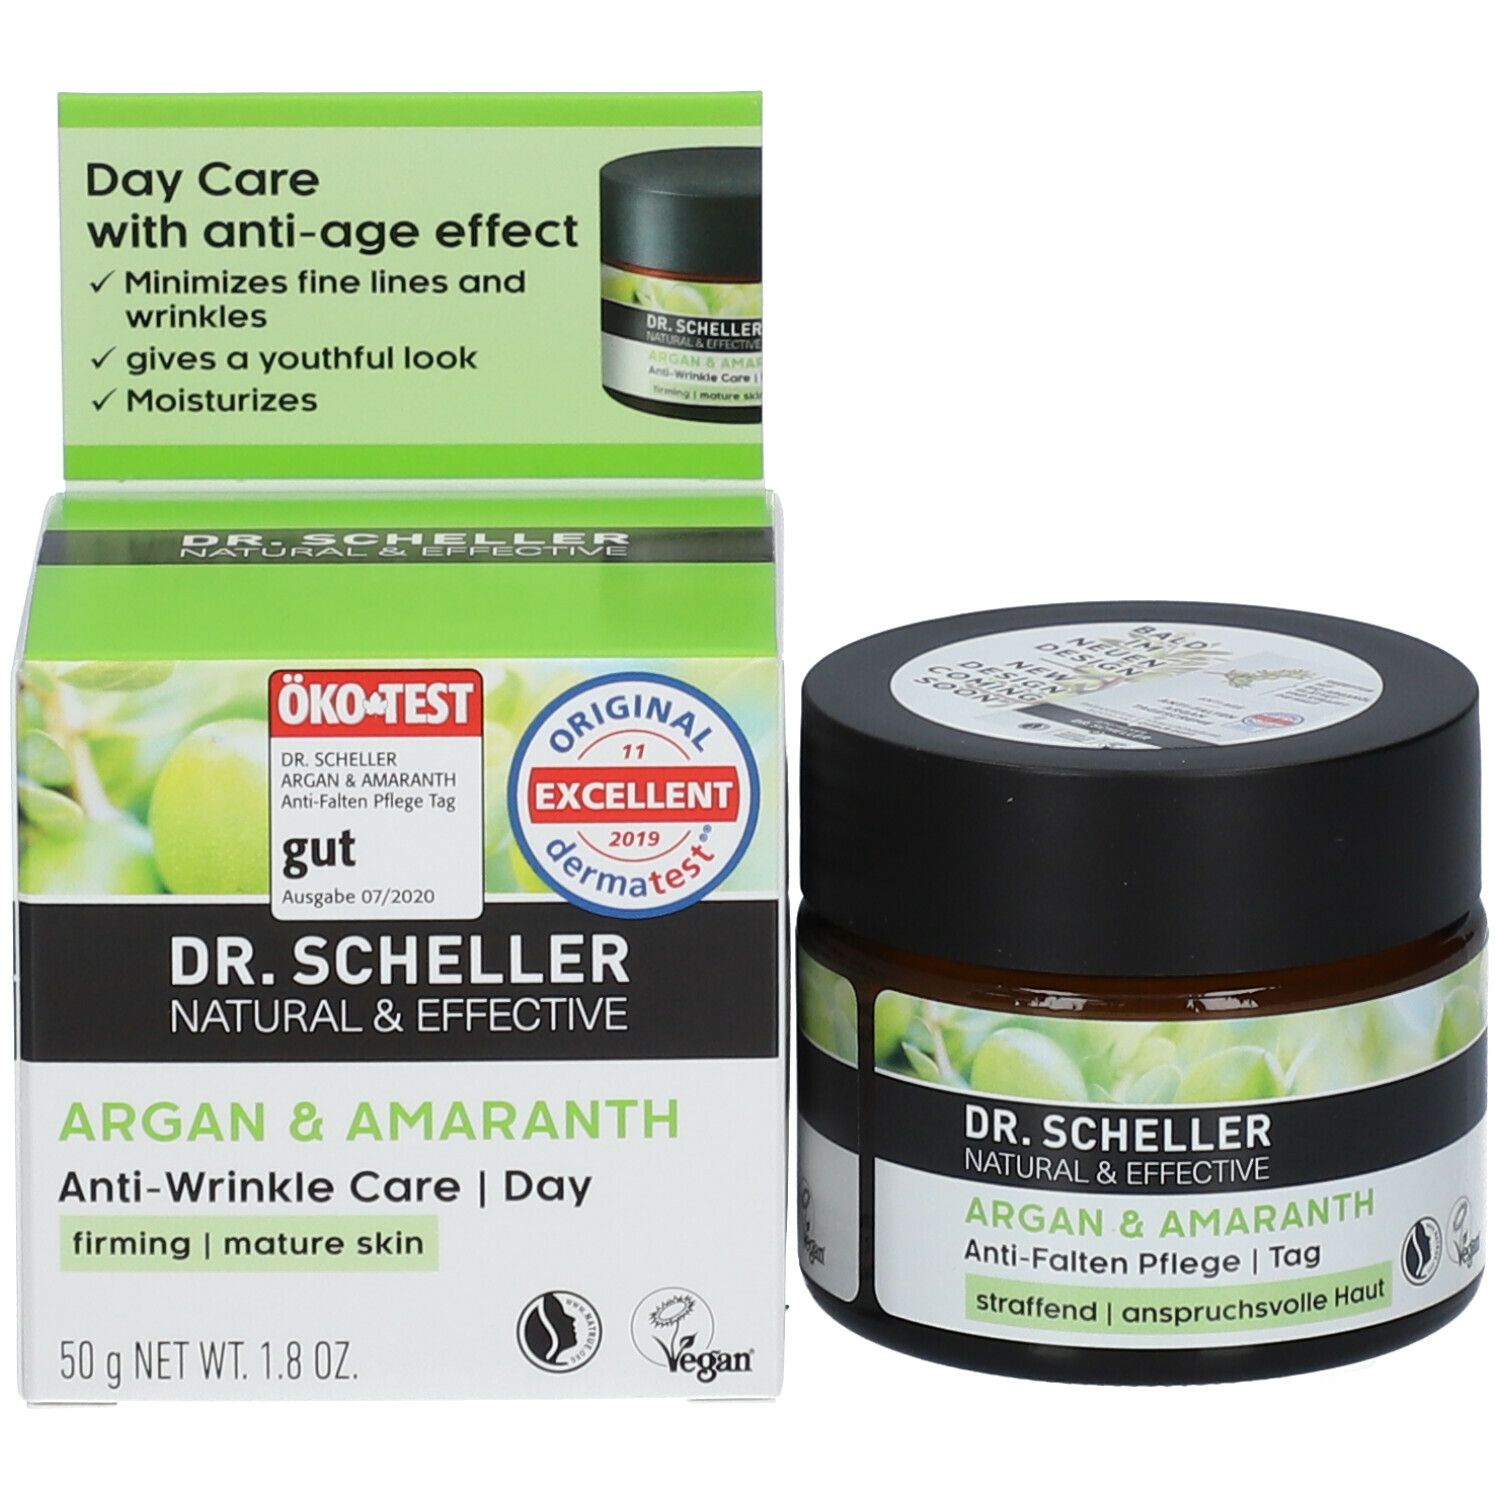 dr. scheller argan oil and amaranth anti-wrinkle day care, 1.8